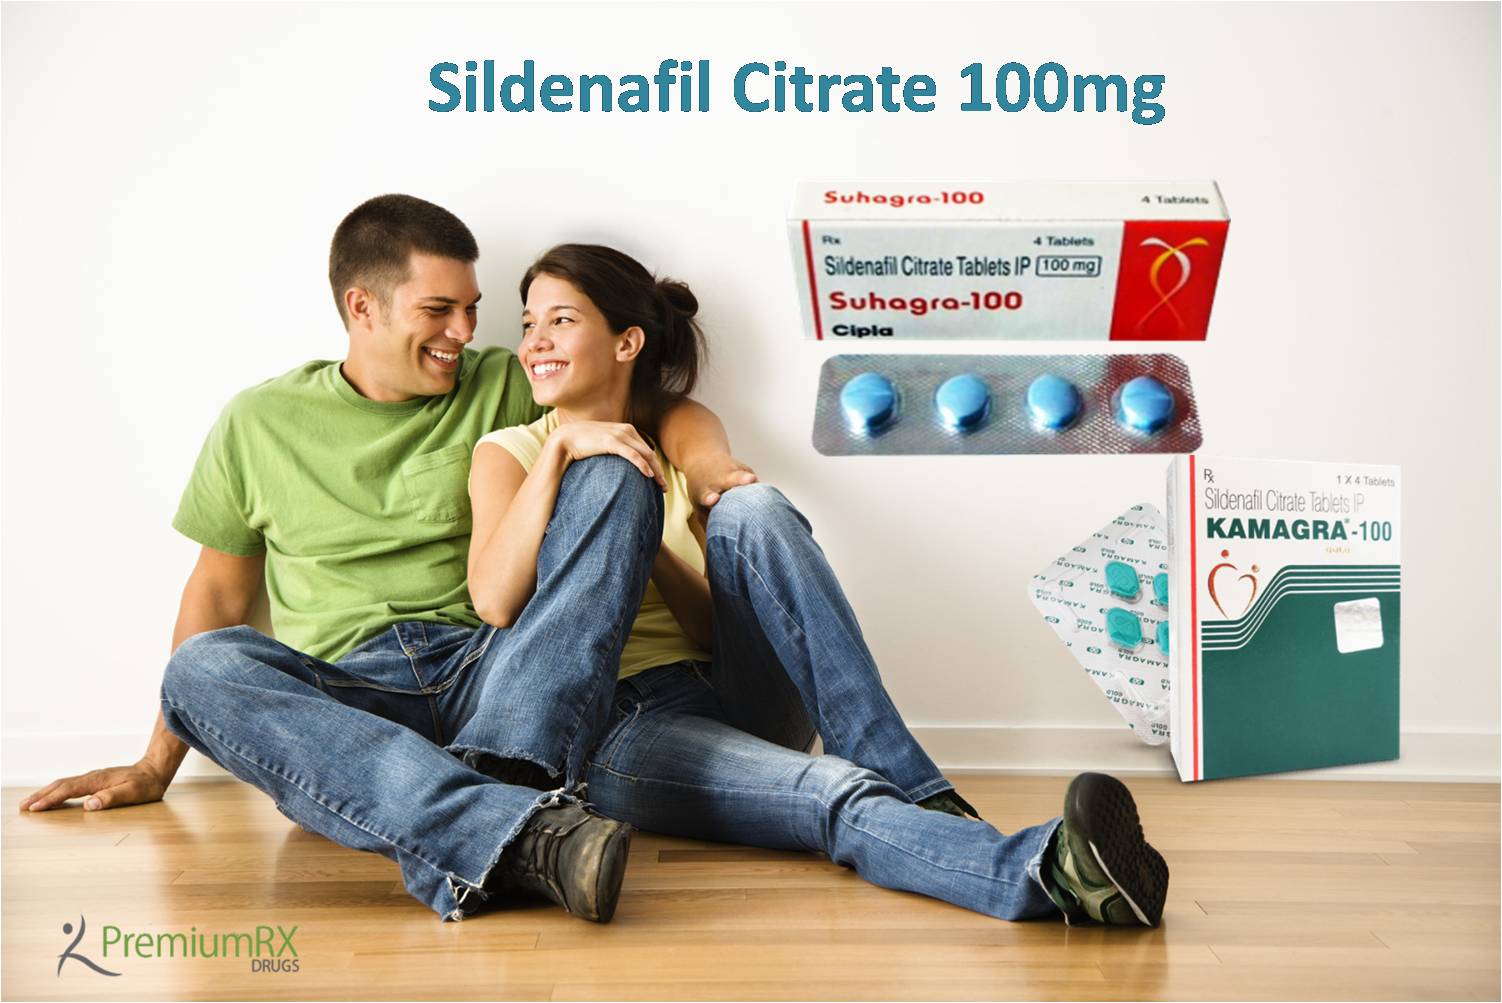 What are the purpose Sildenafil and the maximum dose of Sildenafil